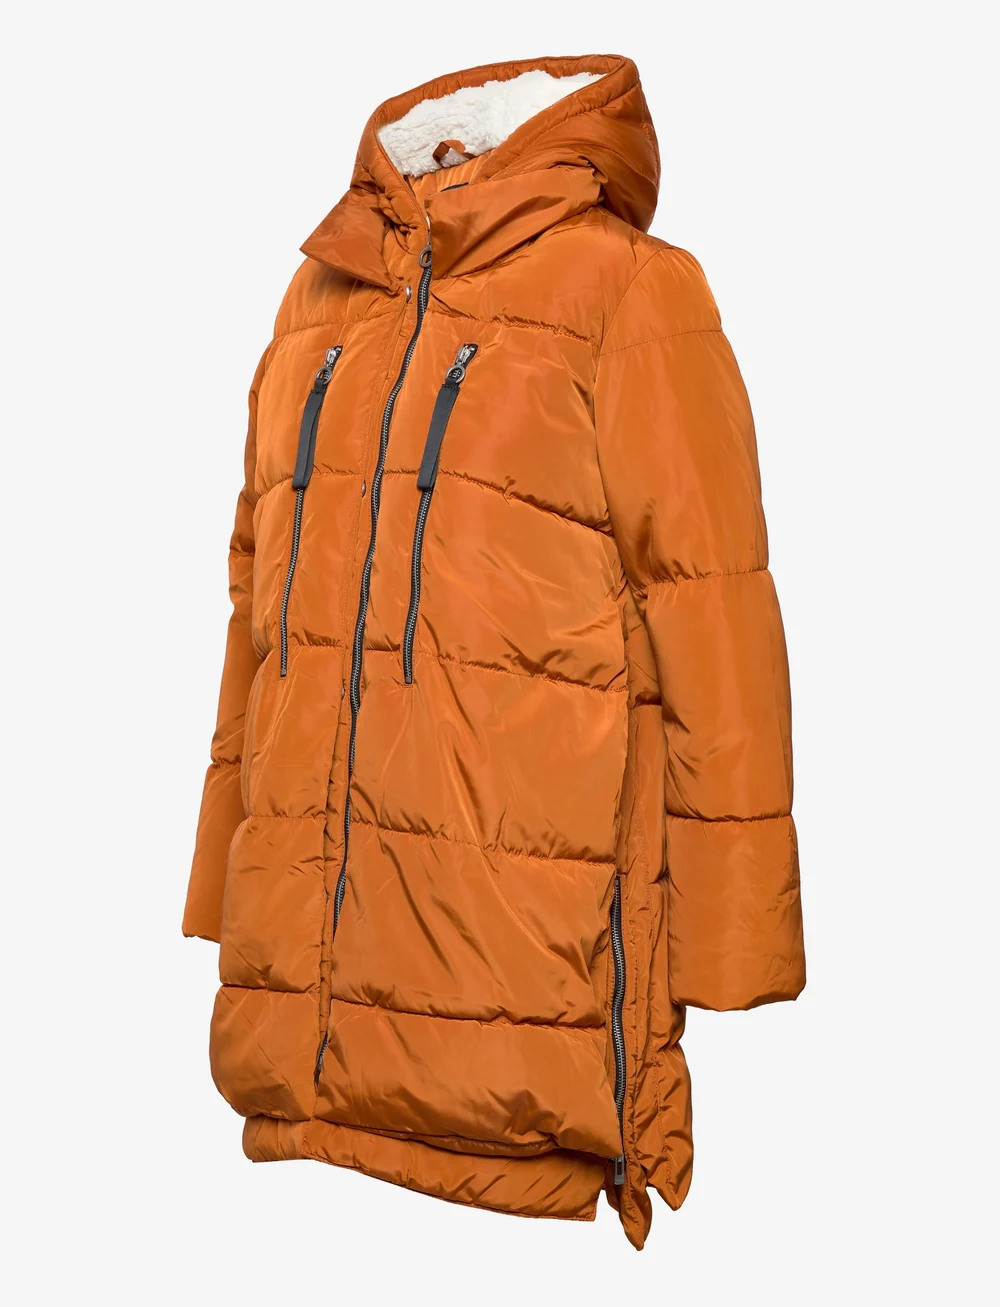 ONLY Onlnora Long Puffer Coat Cc Otw - 30.00 €. Buy Padded Coats from ONLY  online at Boozt.com. Fast delivery and easy returns